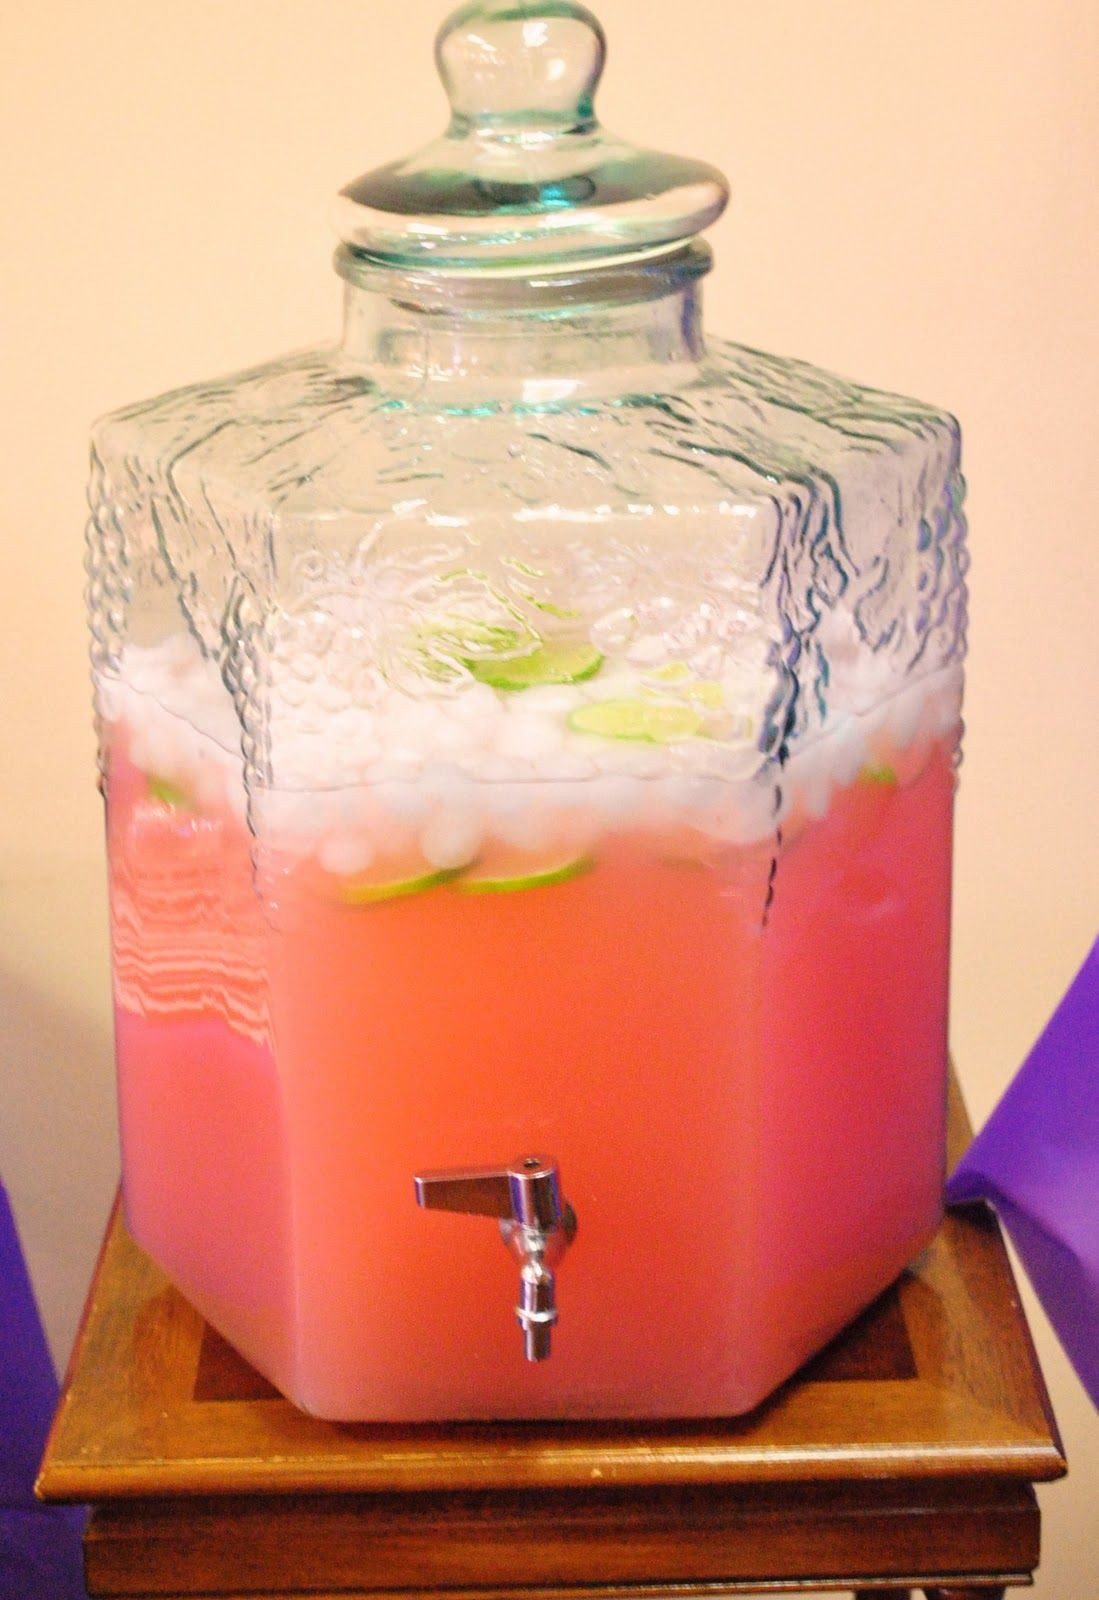 Pink Lemonade Punch Recipes For Baby Shower
 pink fruit punch for baby shower